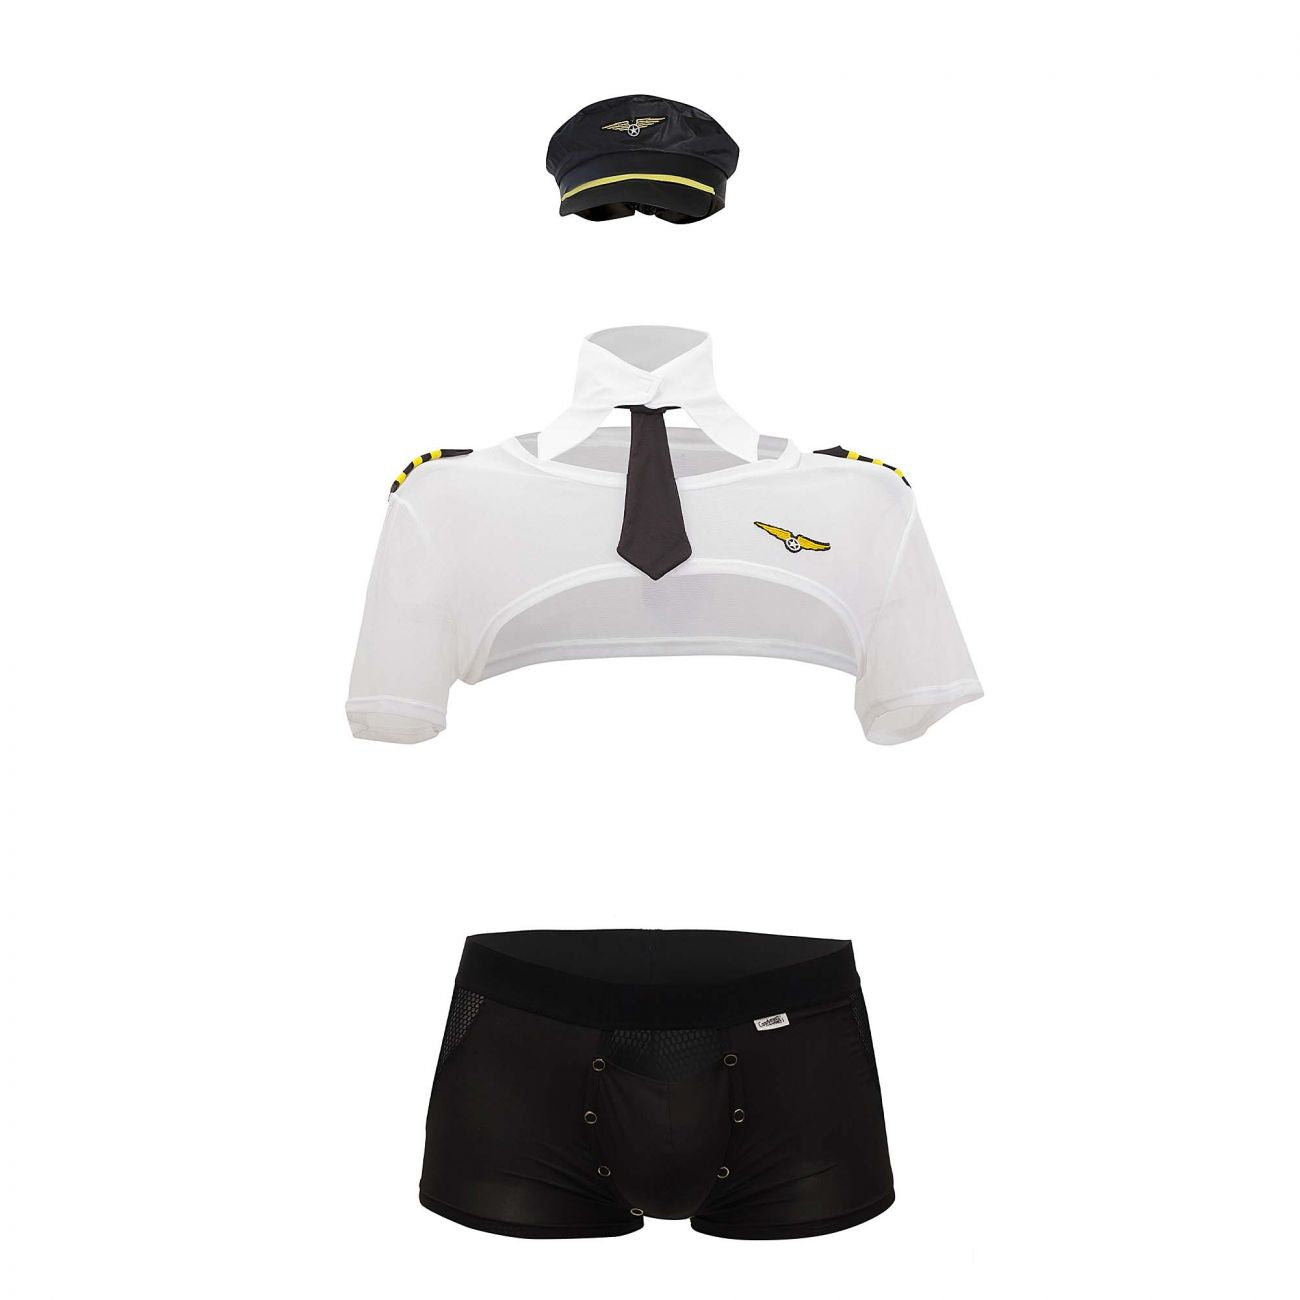 CandyMan 99561 Pilot Costume Outfit